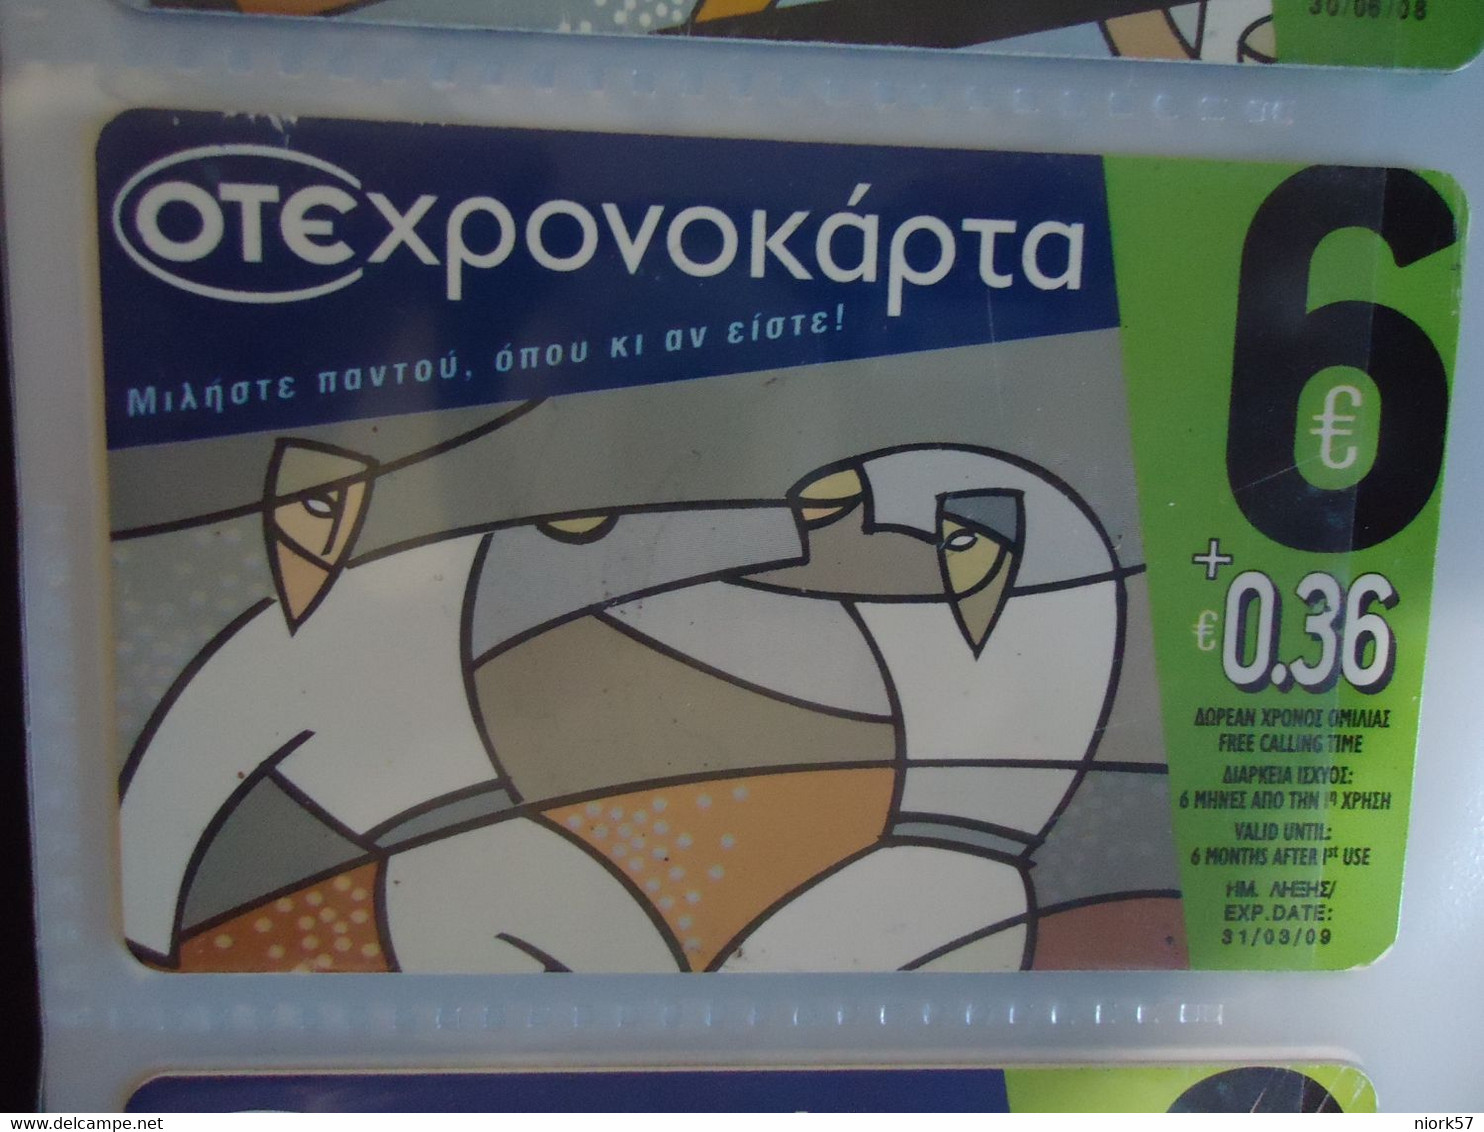 GREECE USED PREPAID CARDS SPORT OLYMPIC GAMES ATHENS 2004 - Olympische Spiele